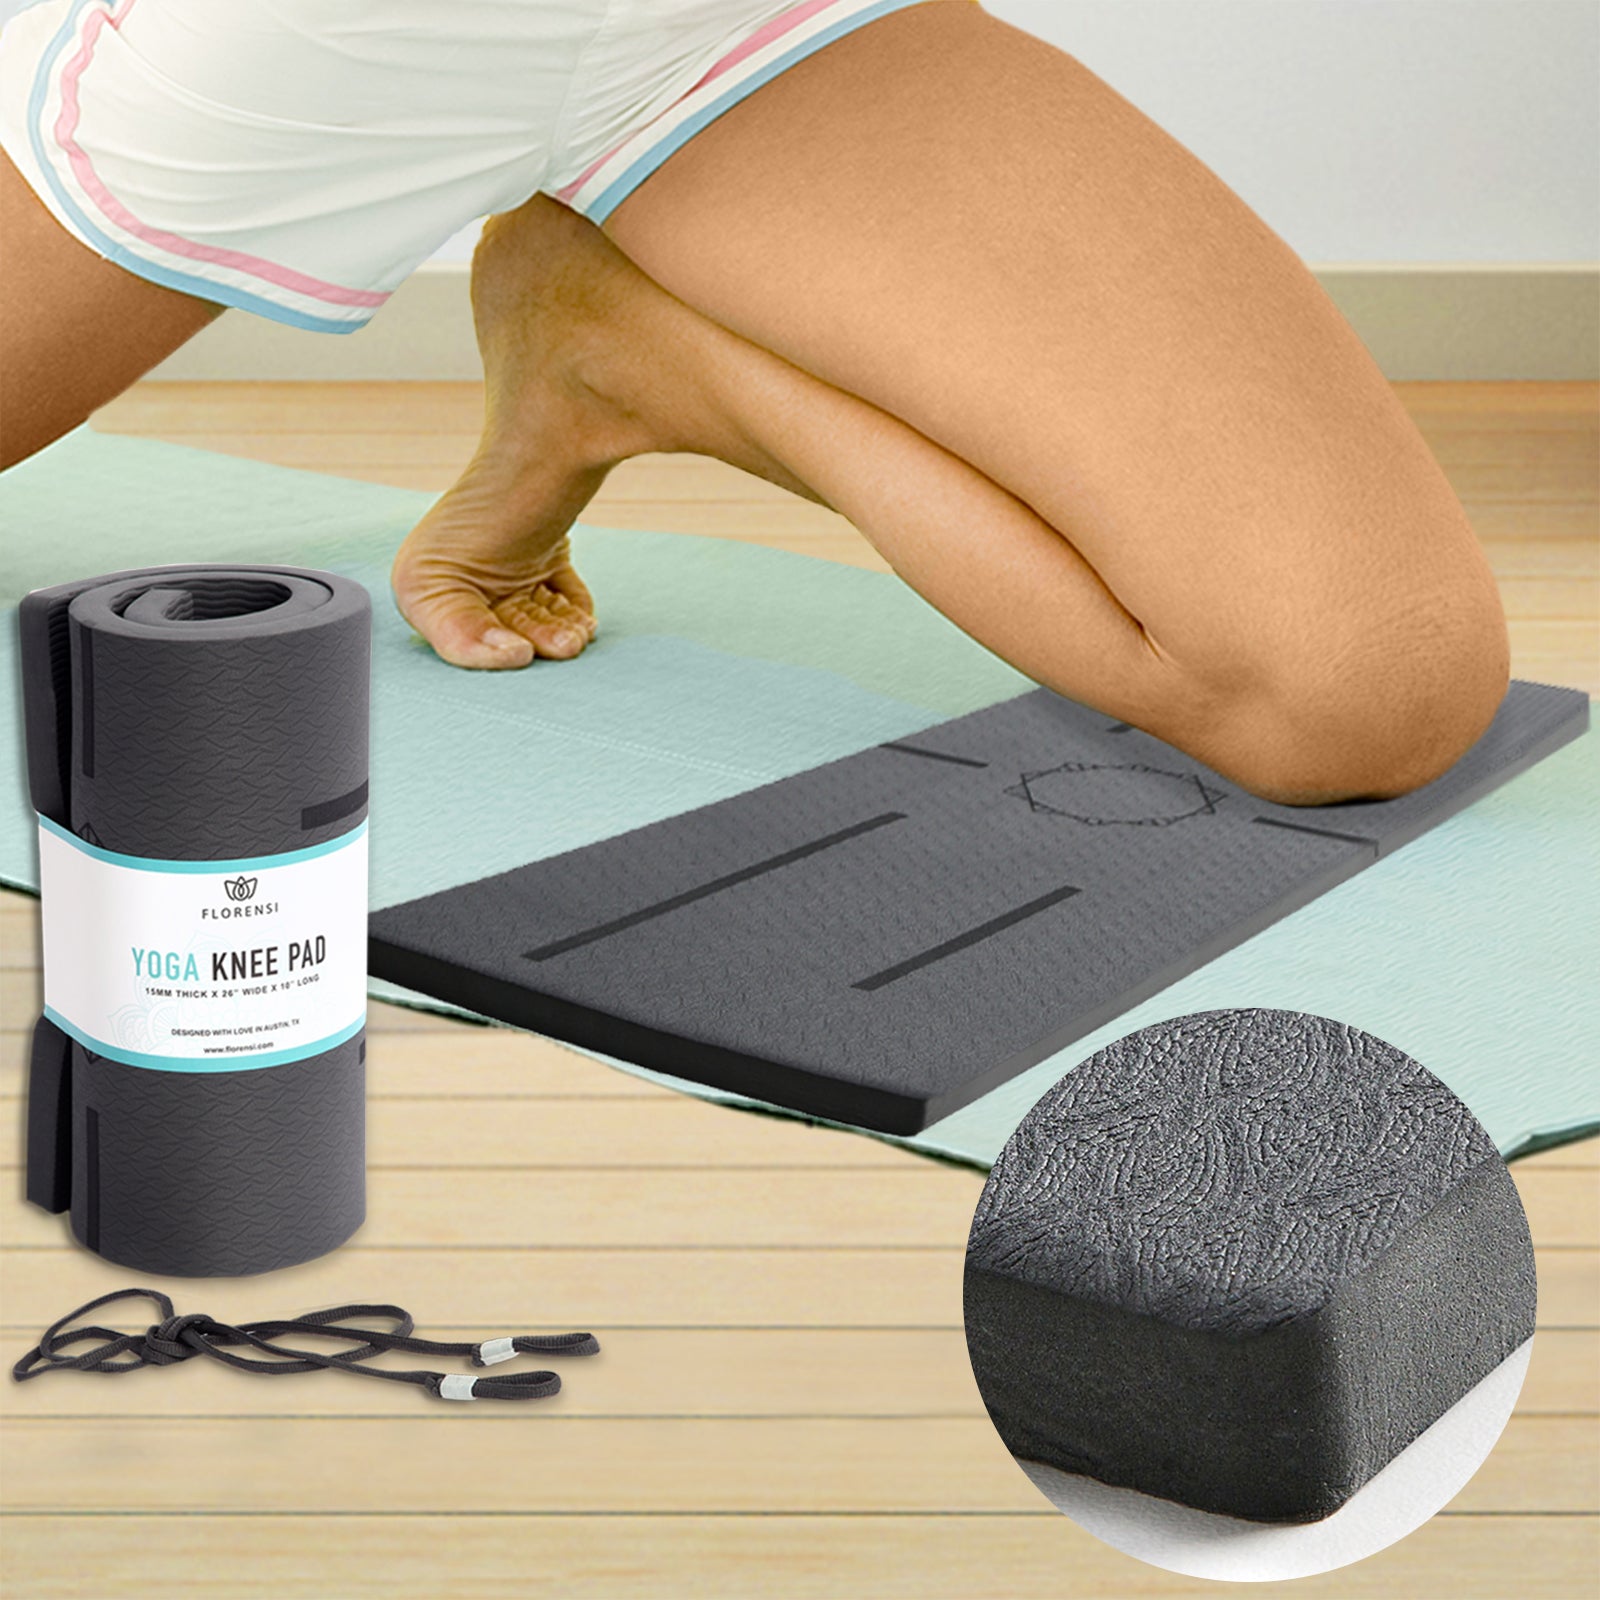 Thick Yoga Knee Pads - Exercise Cushion For Knees, Elbows, Wrists